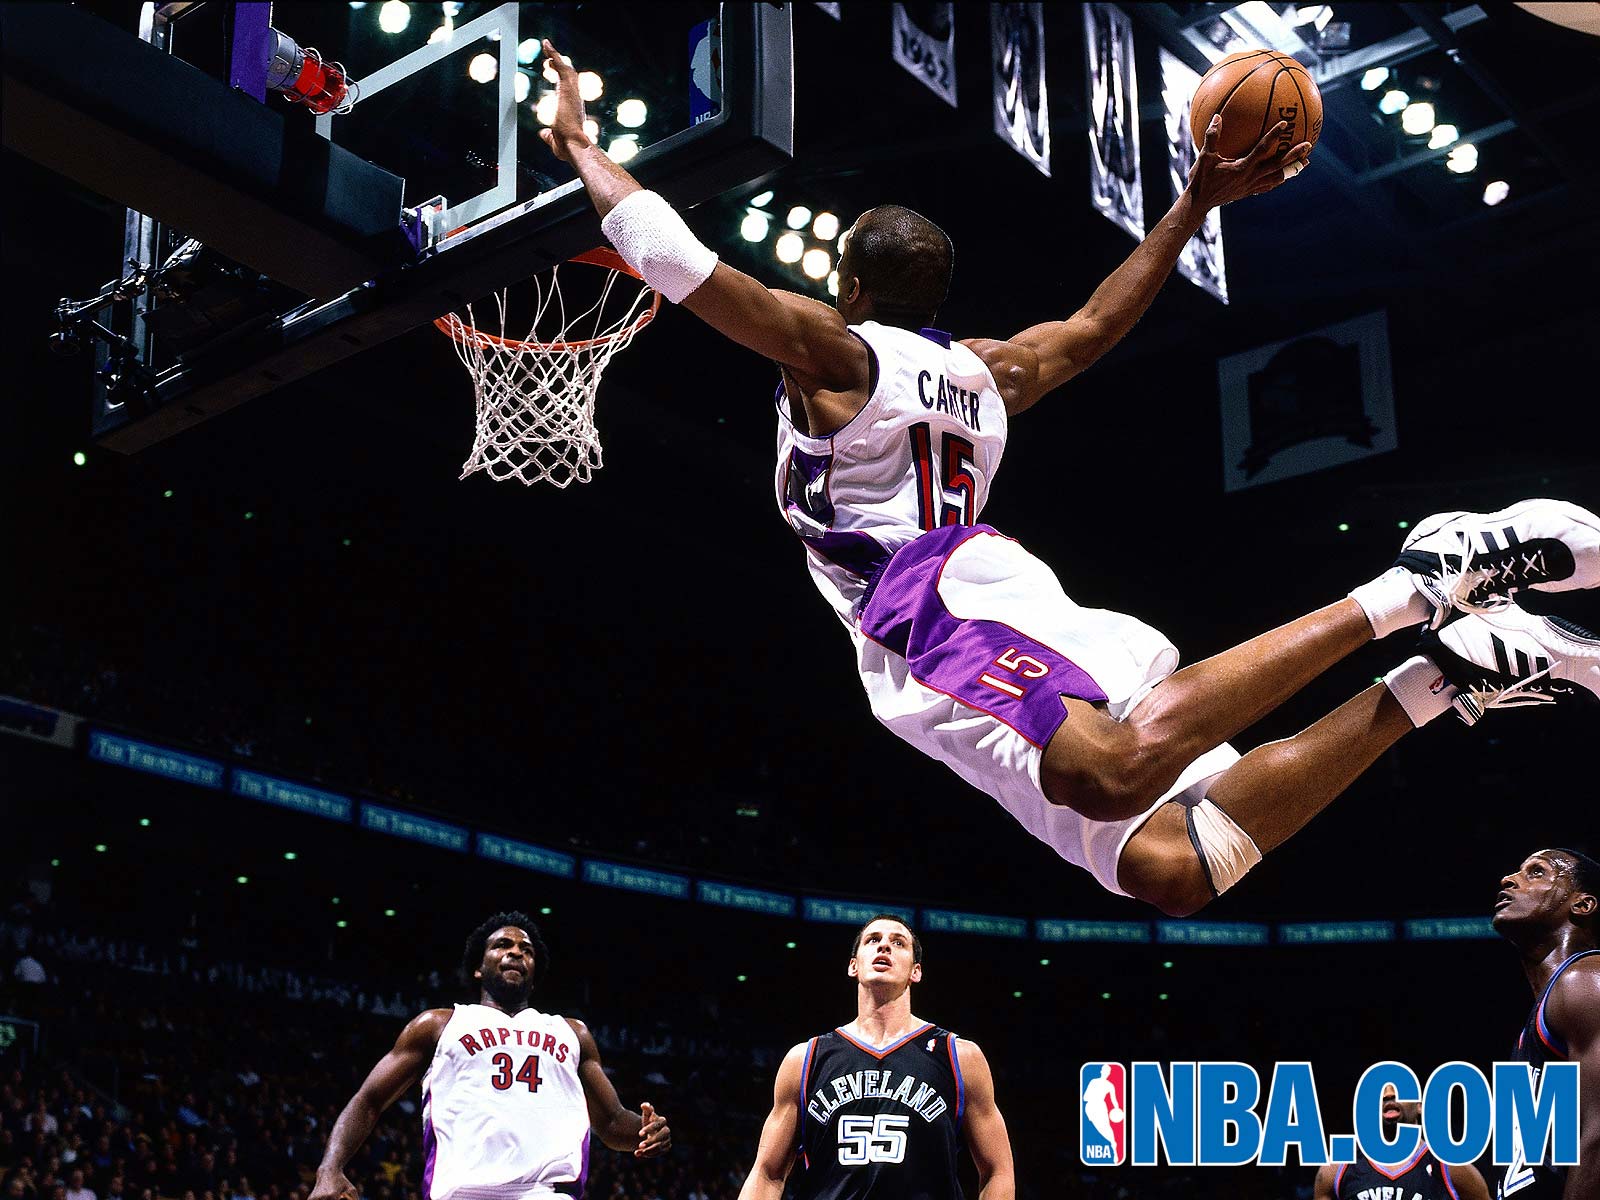 1301-heres-wallpaper-with-one-of-the-famous-air-canada-dunks-from-times-he